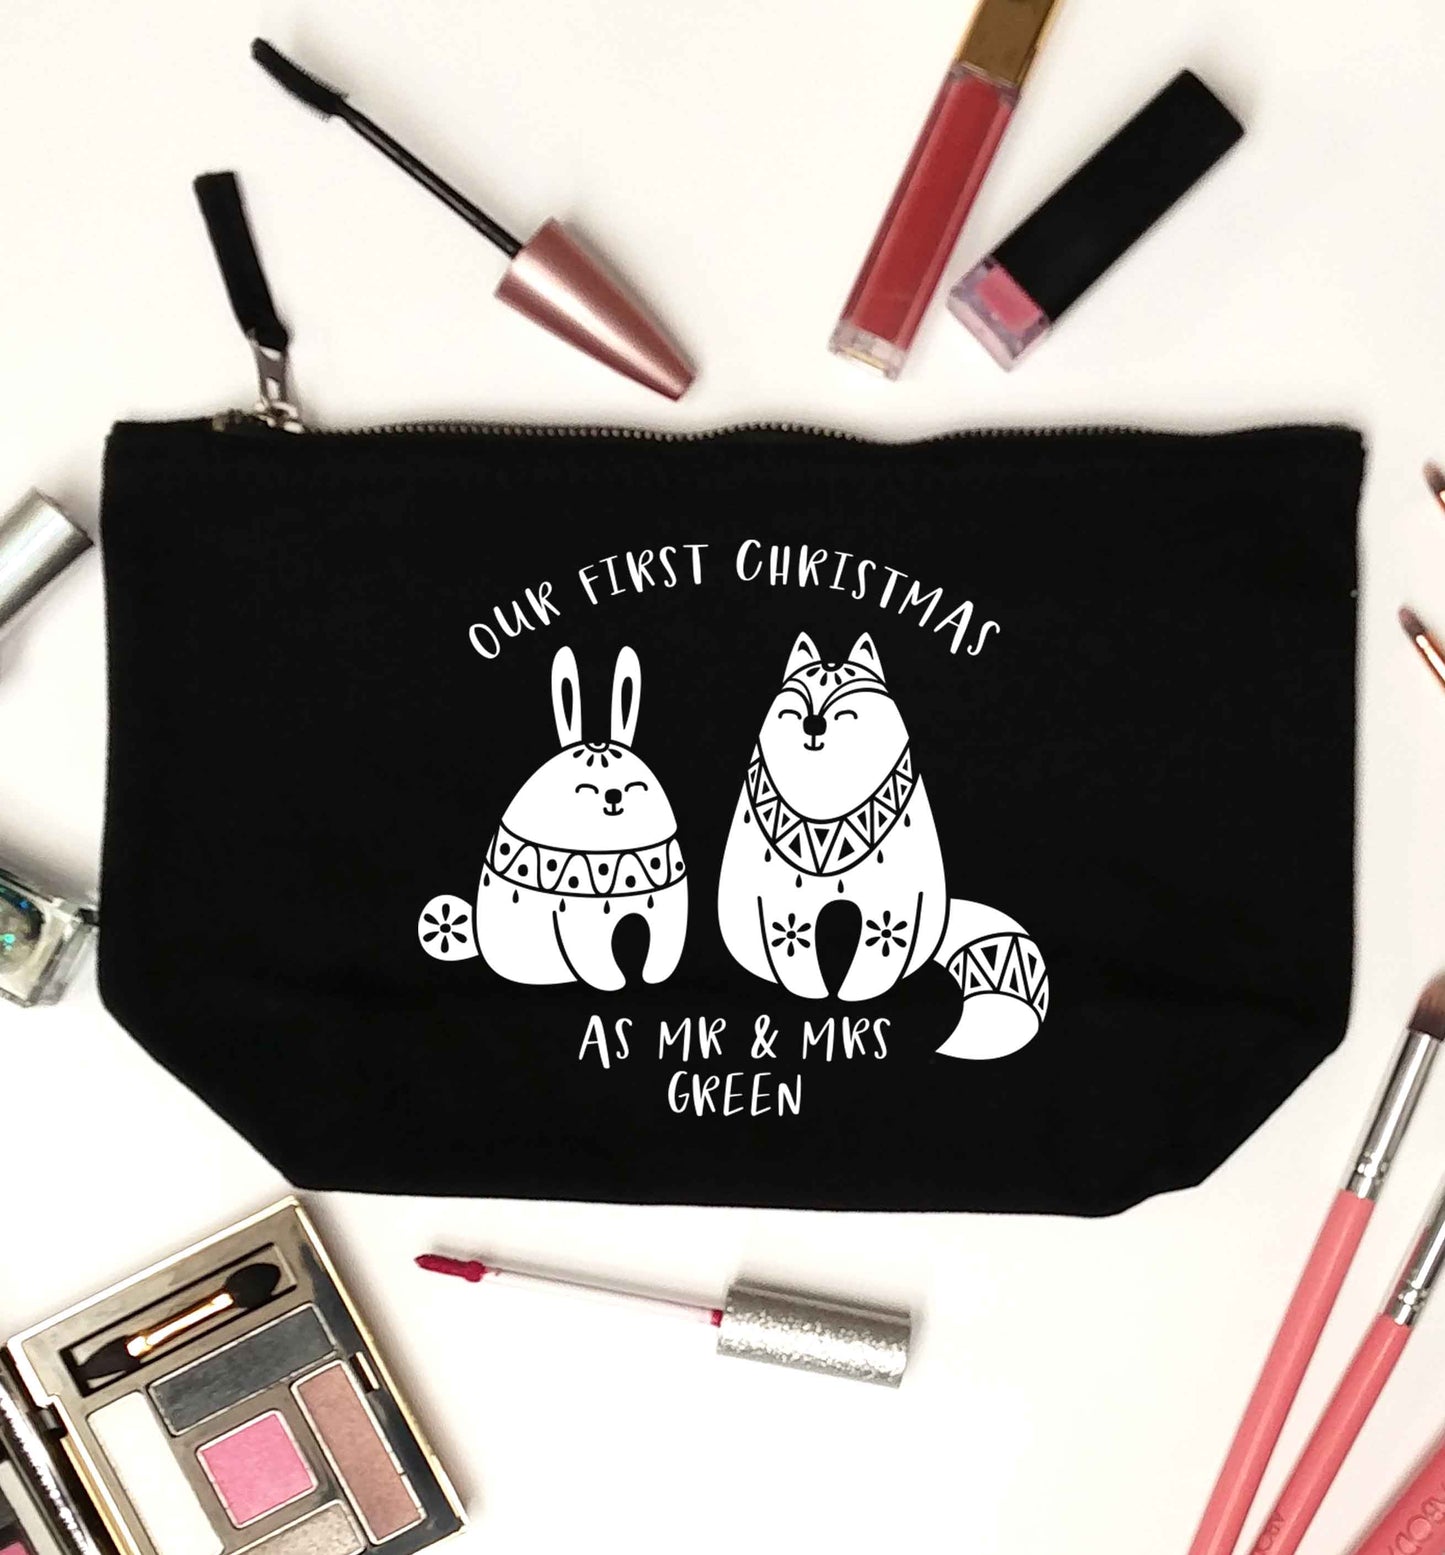 Our first Christmas as Mr & Mrs personalised black makeup bag